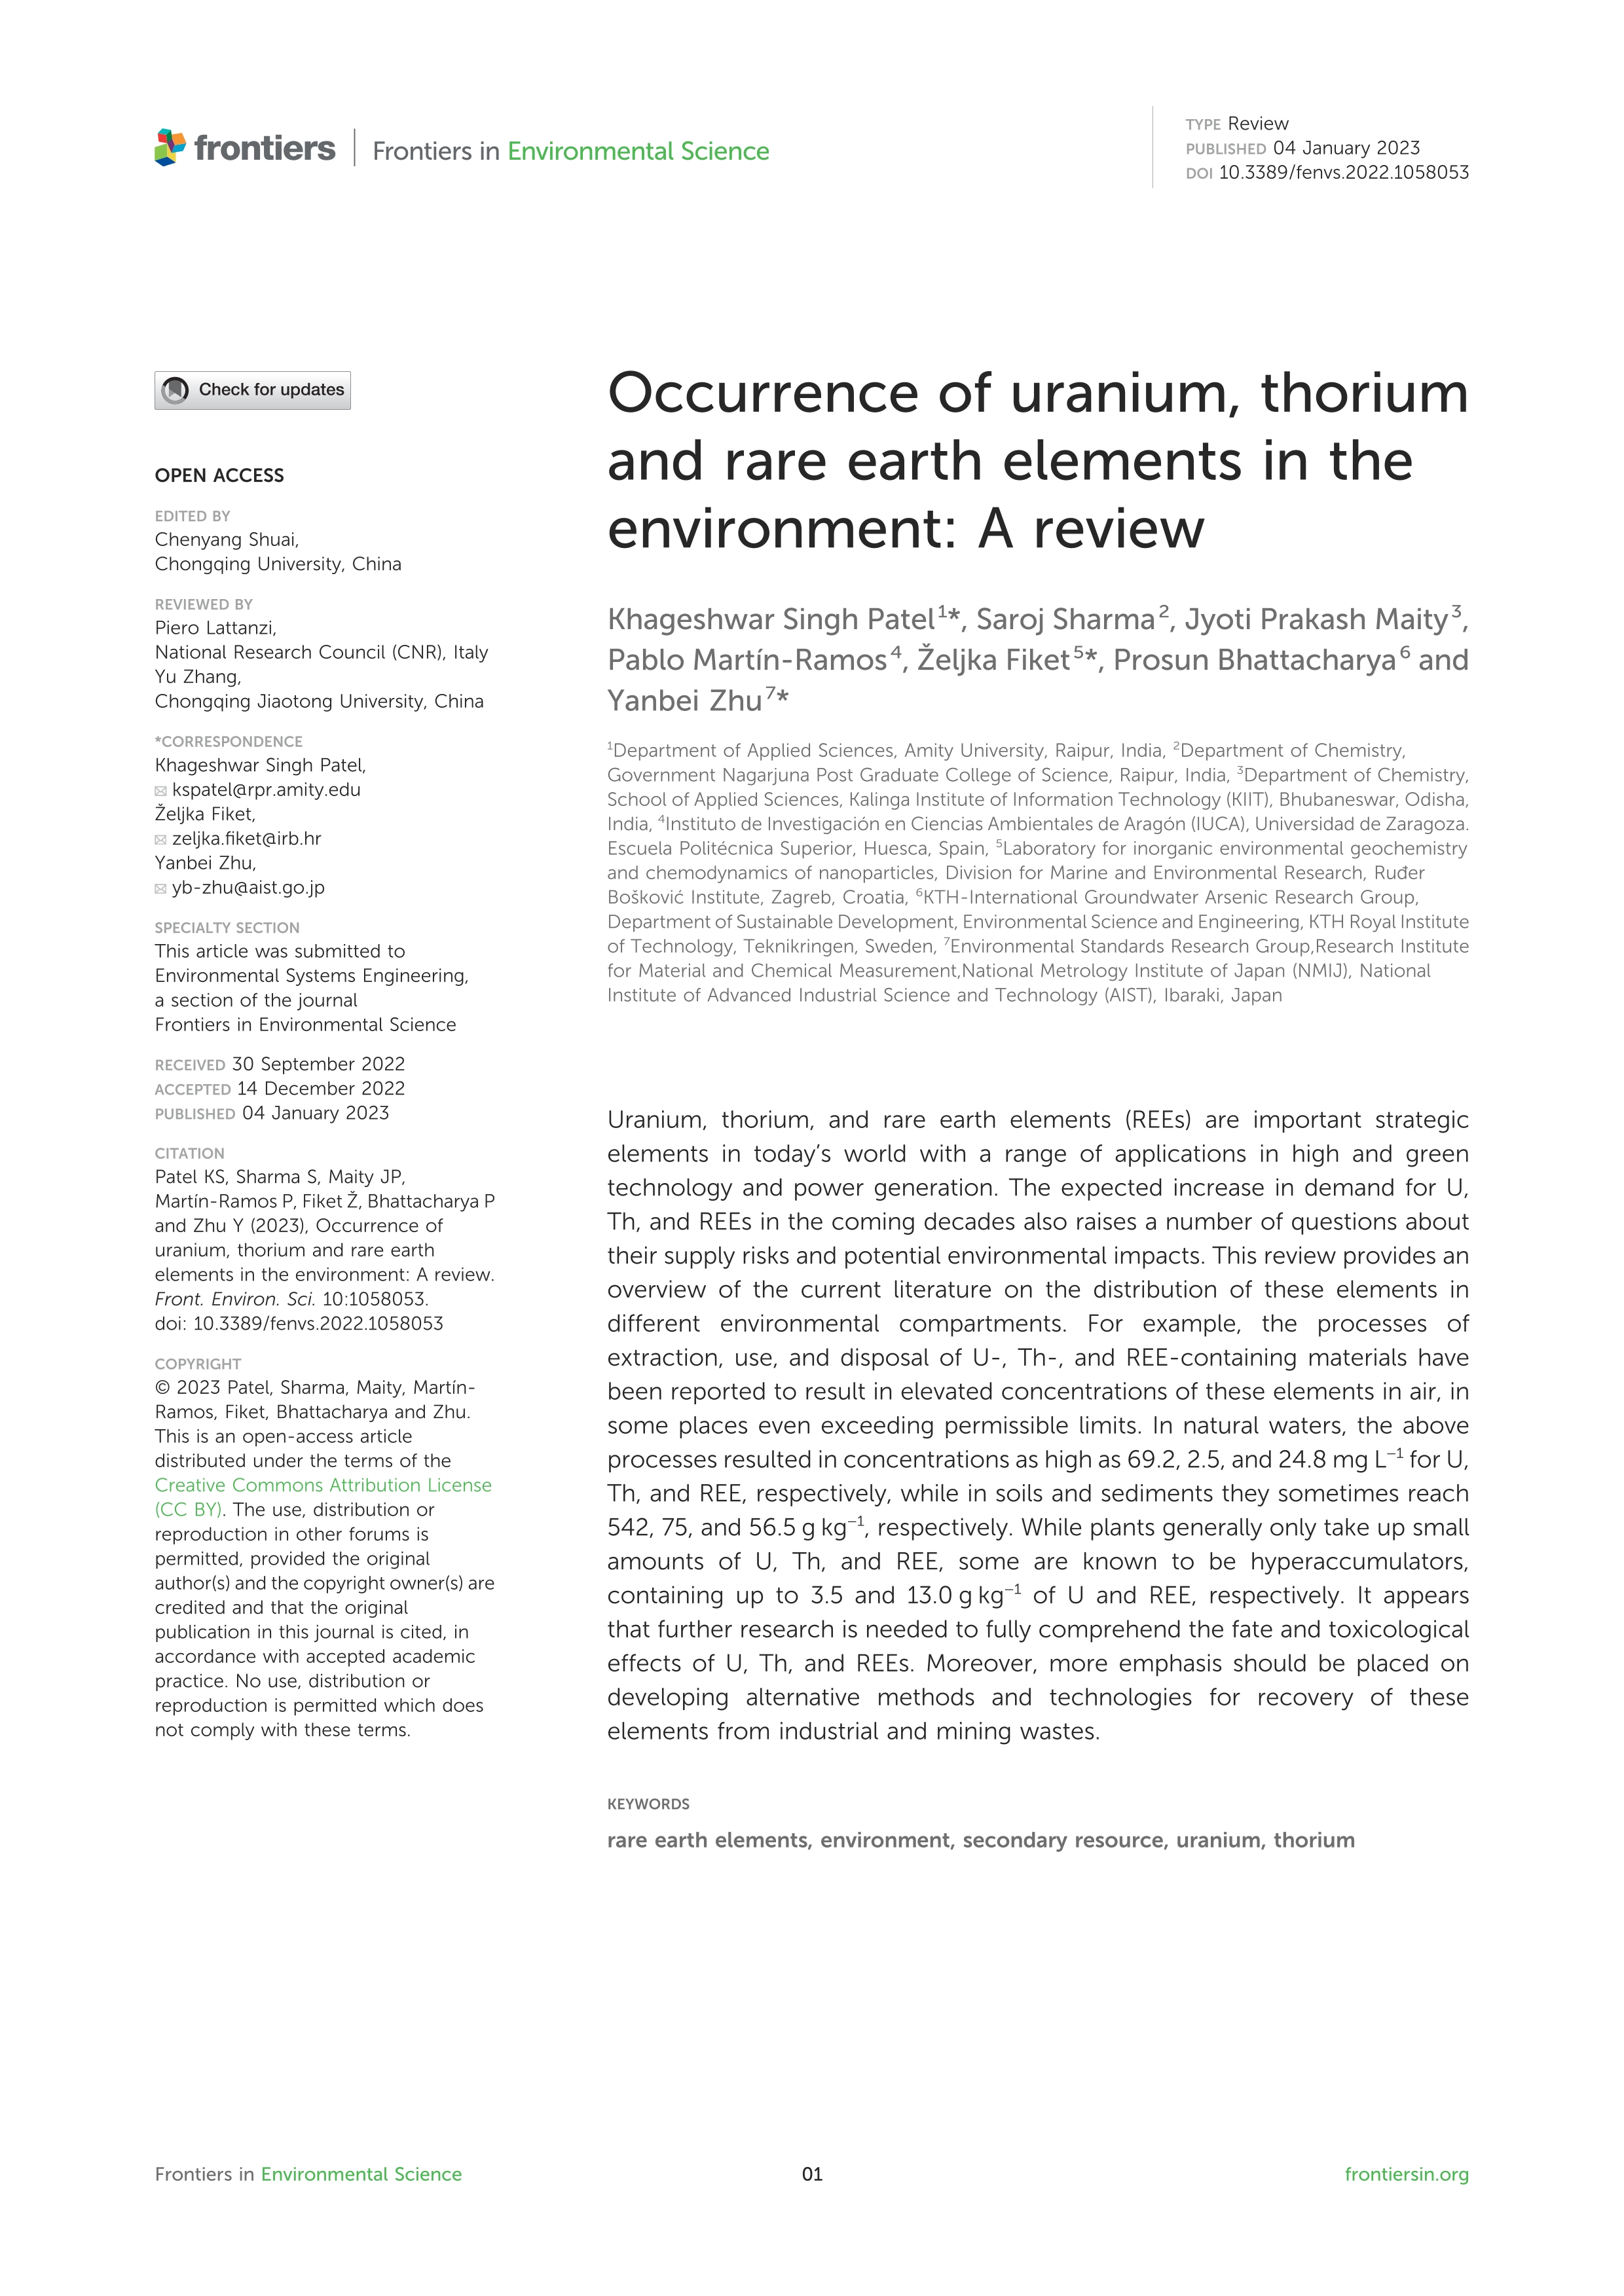 Occurrence of uranium, thorium and rare earth elements in the environment: A review